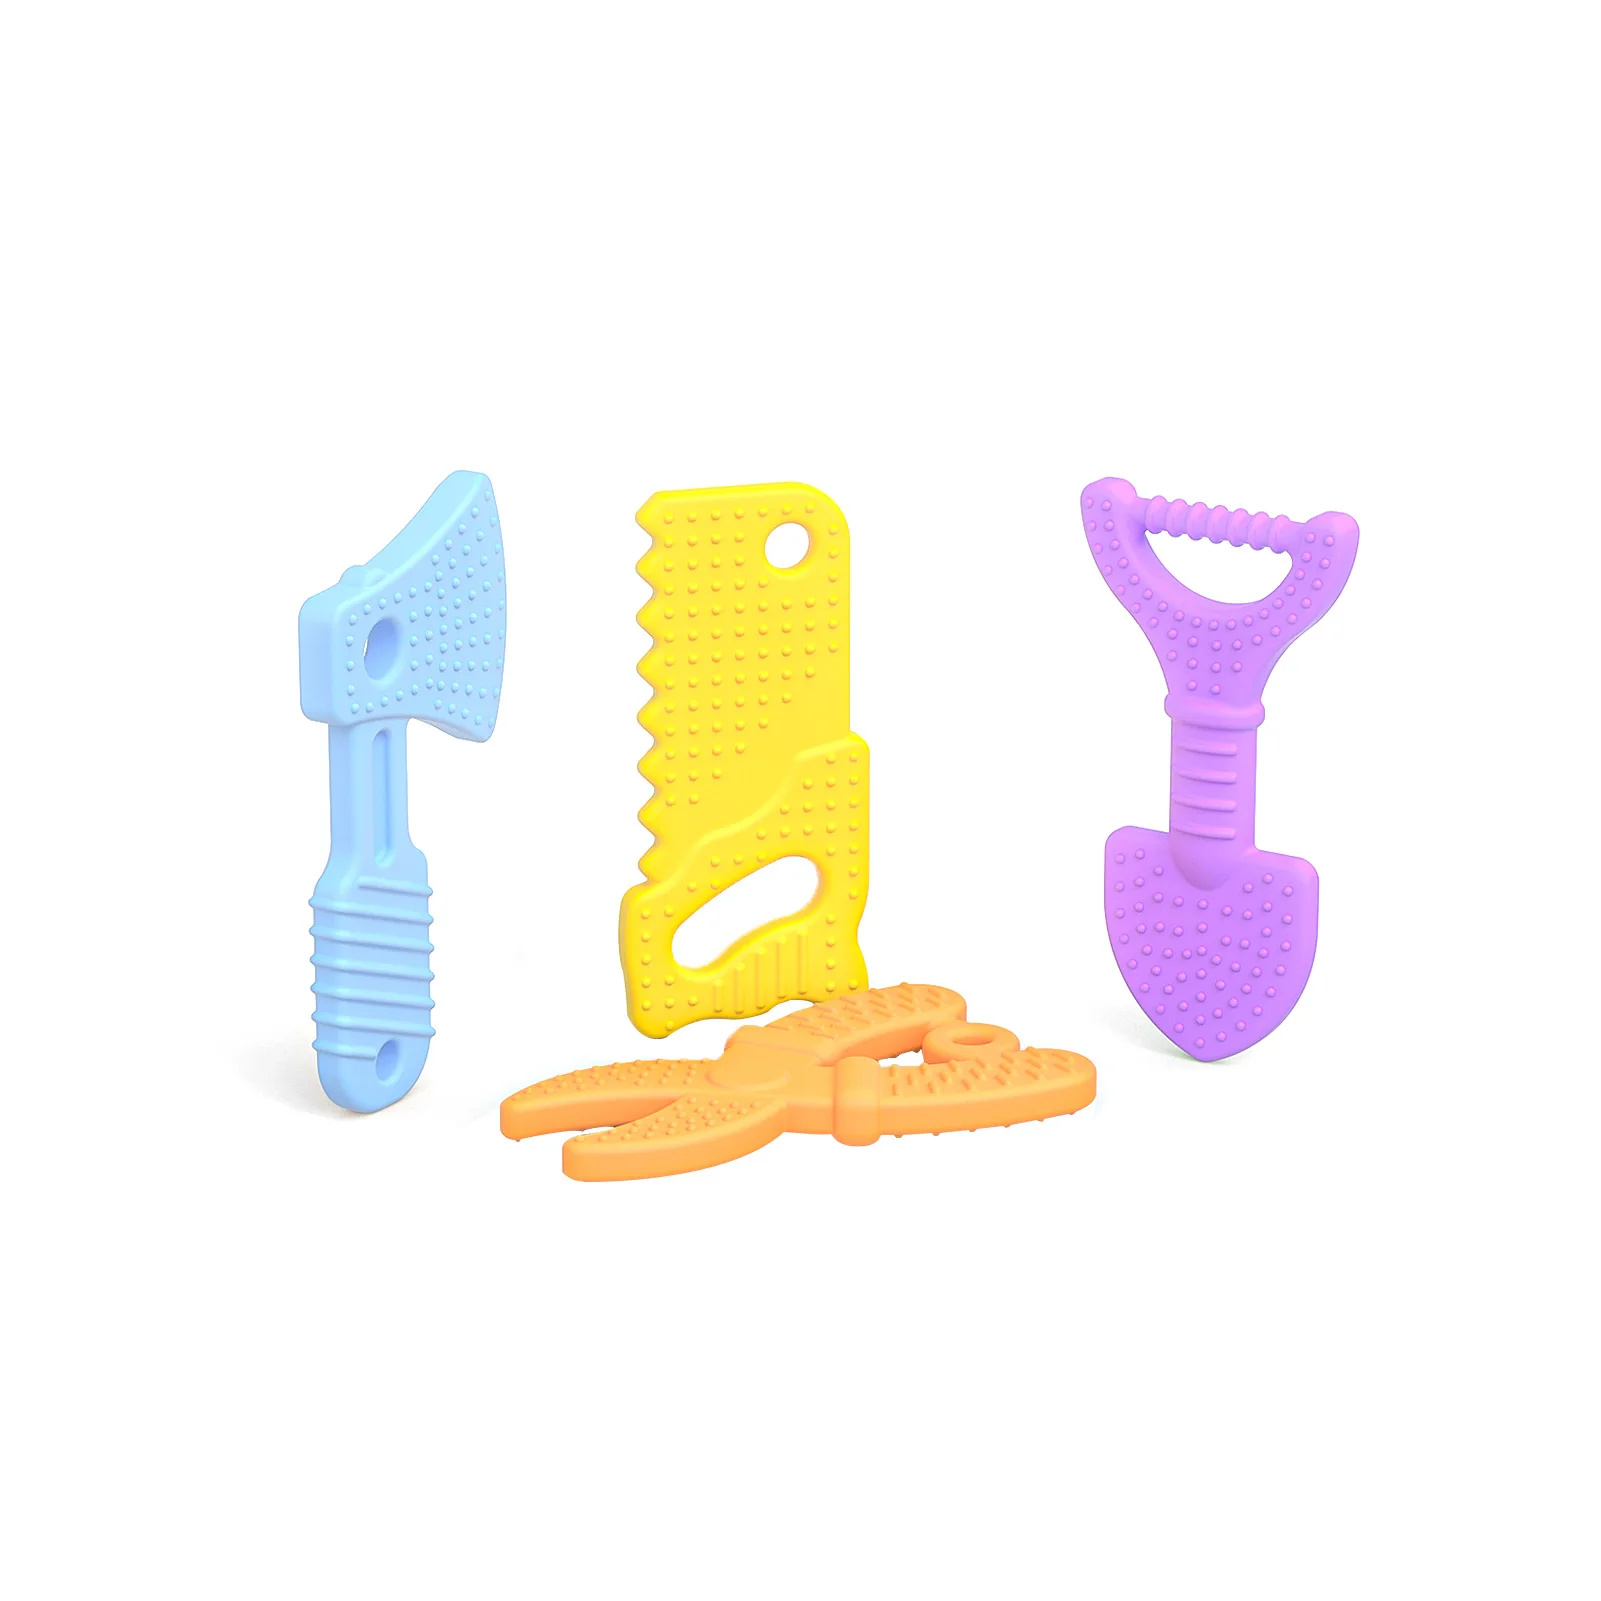 

4pcs Baby Teether For Teething Silicone Baby Sensory Toys Infant Chew Toys To Soothe Babies Sore Gums Sensory Exploration And